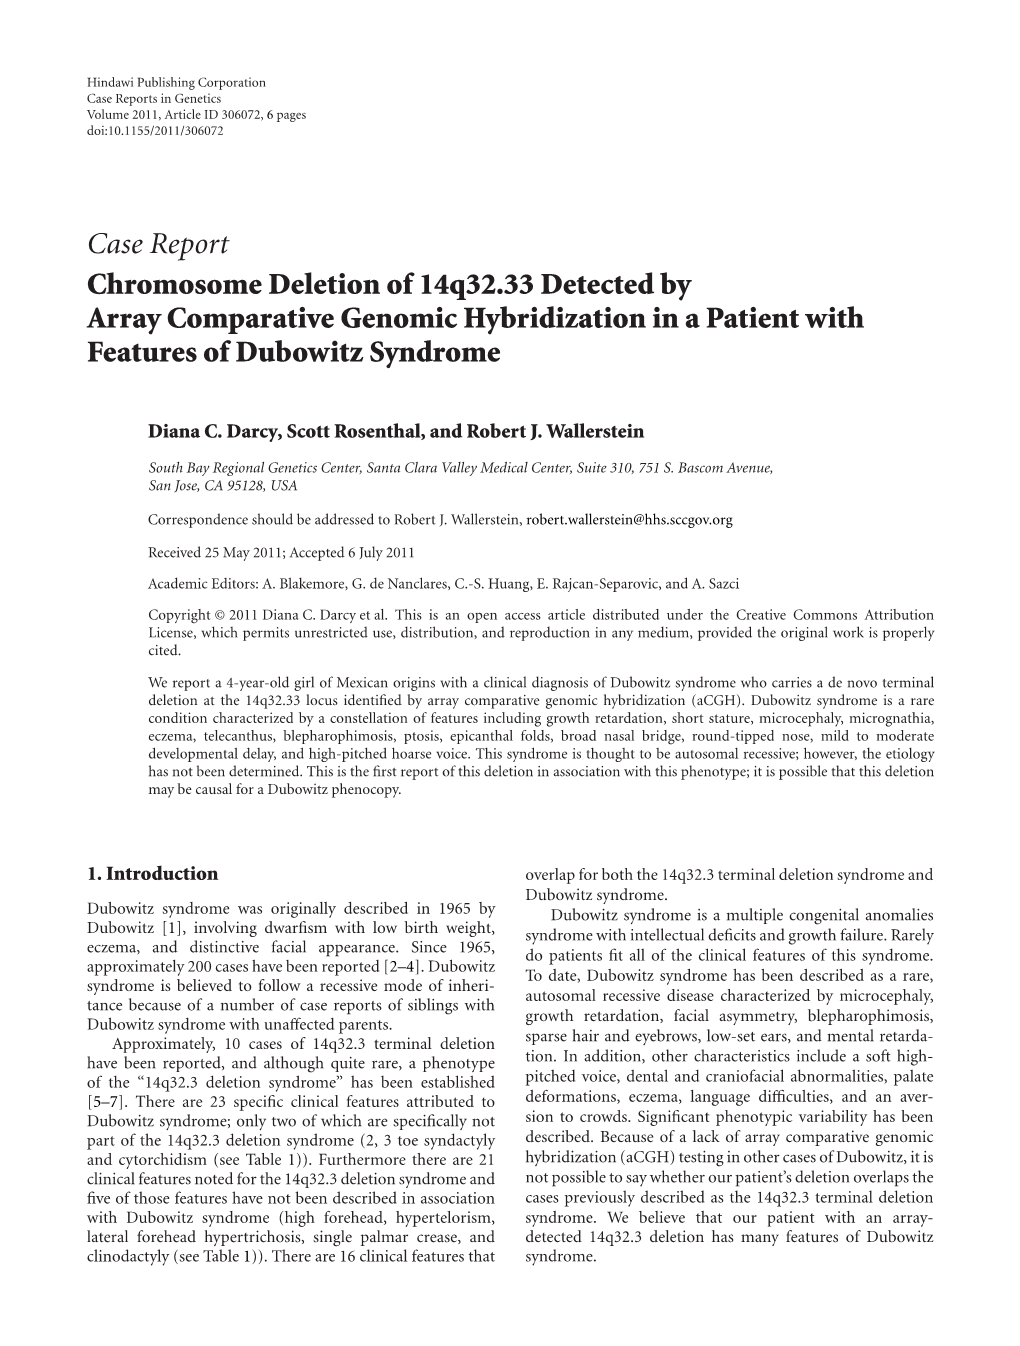 Case Report Chromosome Deletion of 14Q32.33 Detected by Array Comparative Genomic Hybridization in a Patient with Features of Dubowitz Syndrome